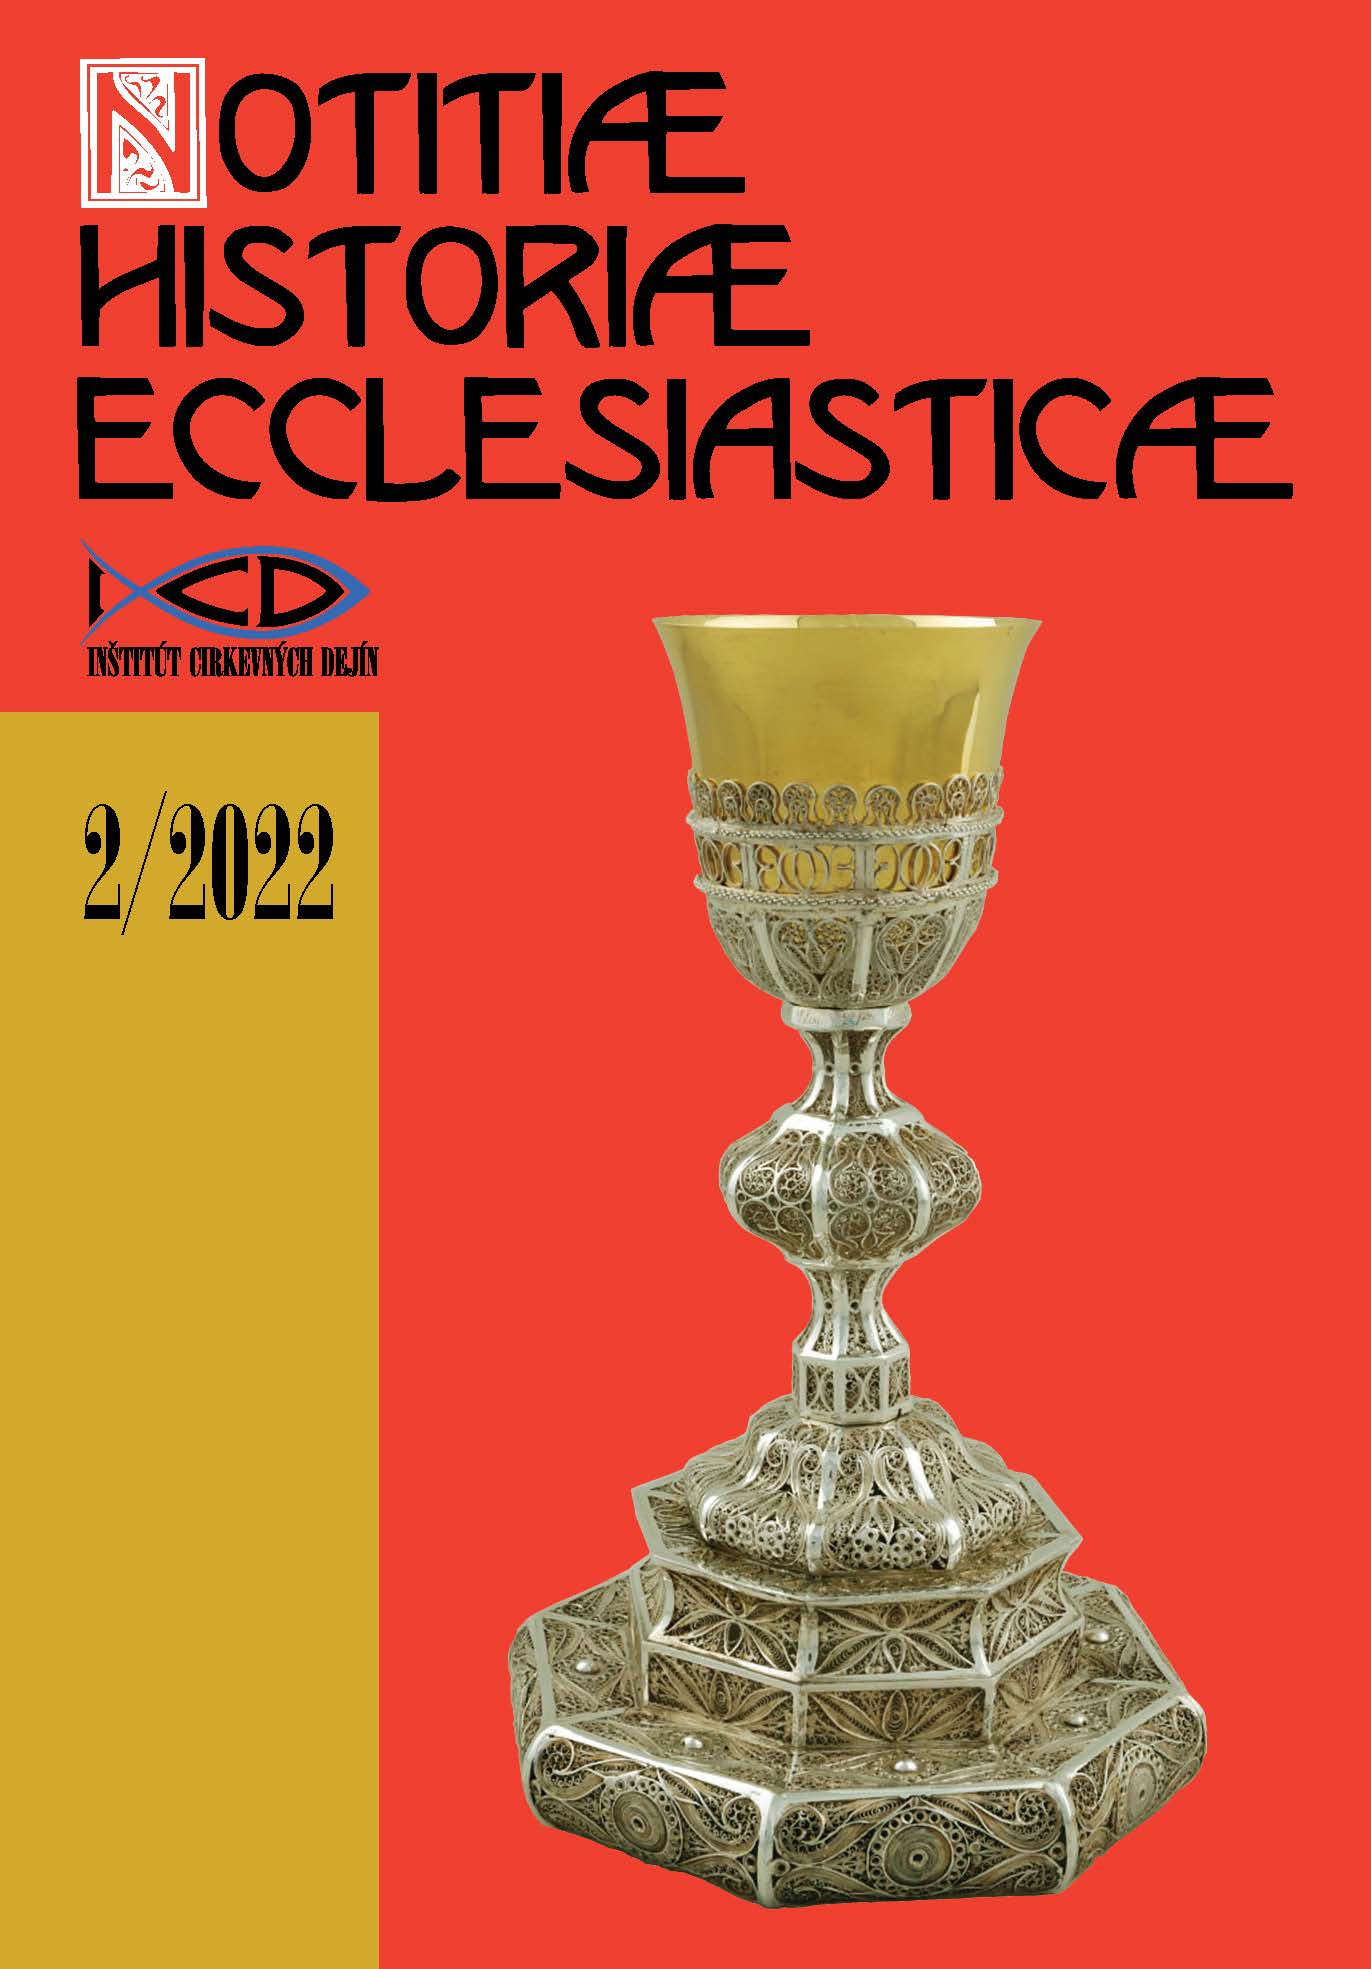 Associational and social activities of Dominican Mikuláš Lexmann Cover Image